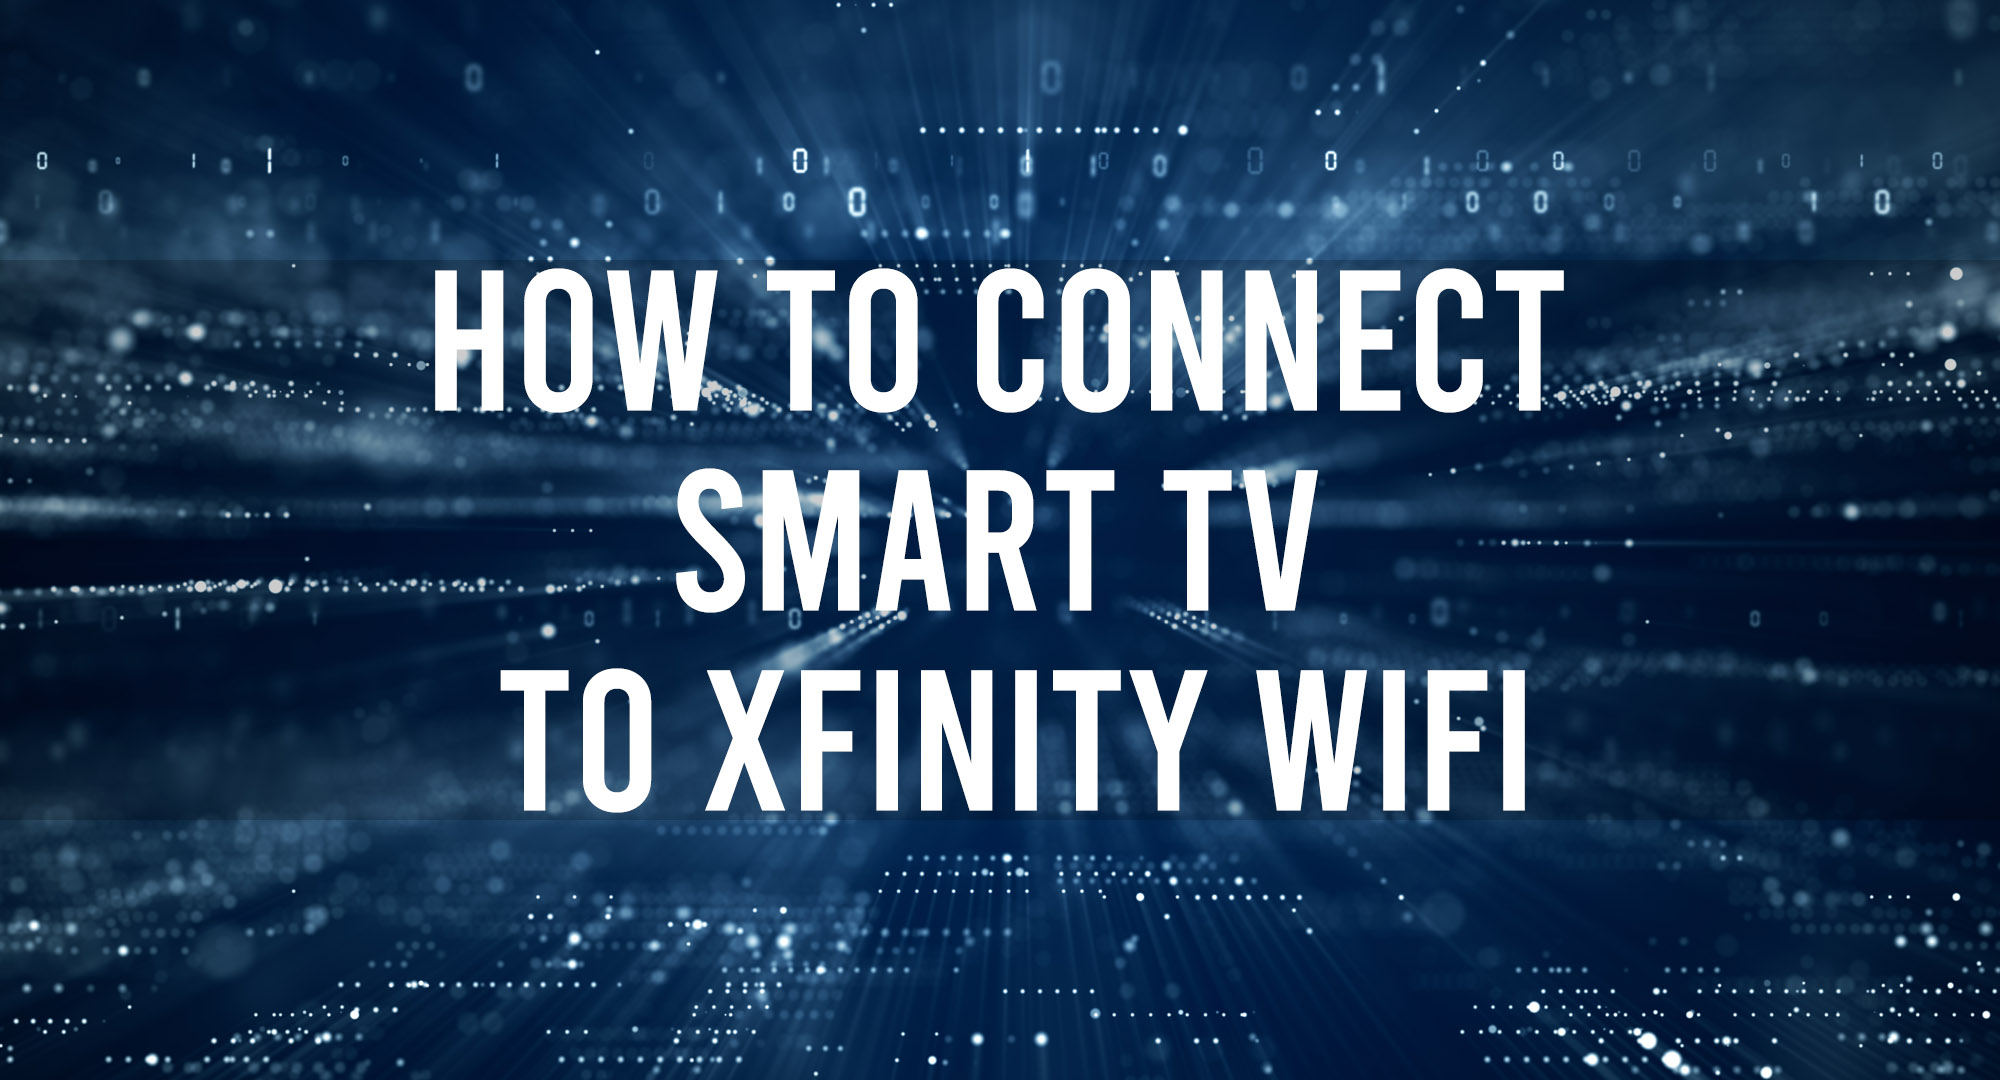 How to Connect Smart TV to Xfinity WiFi